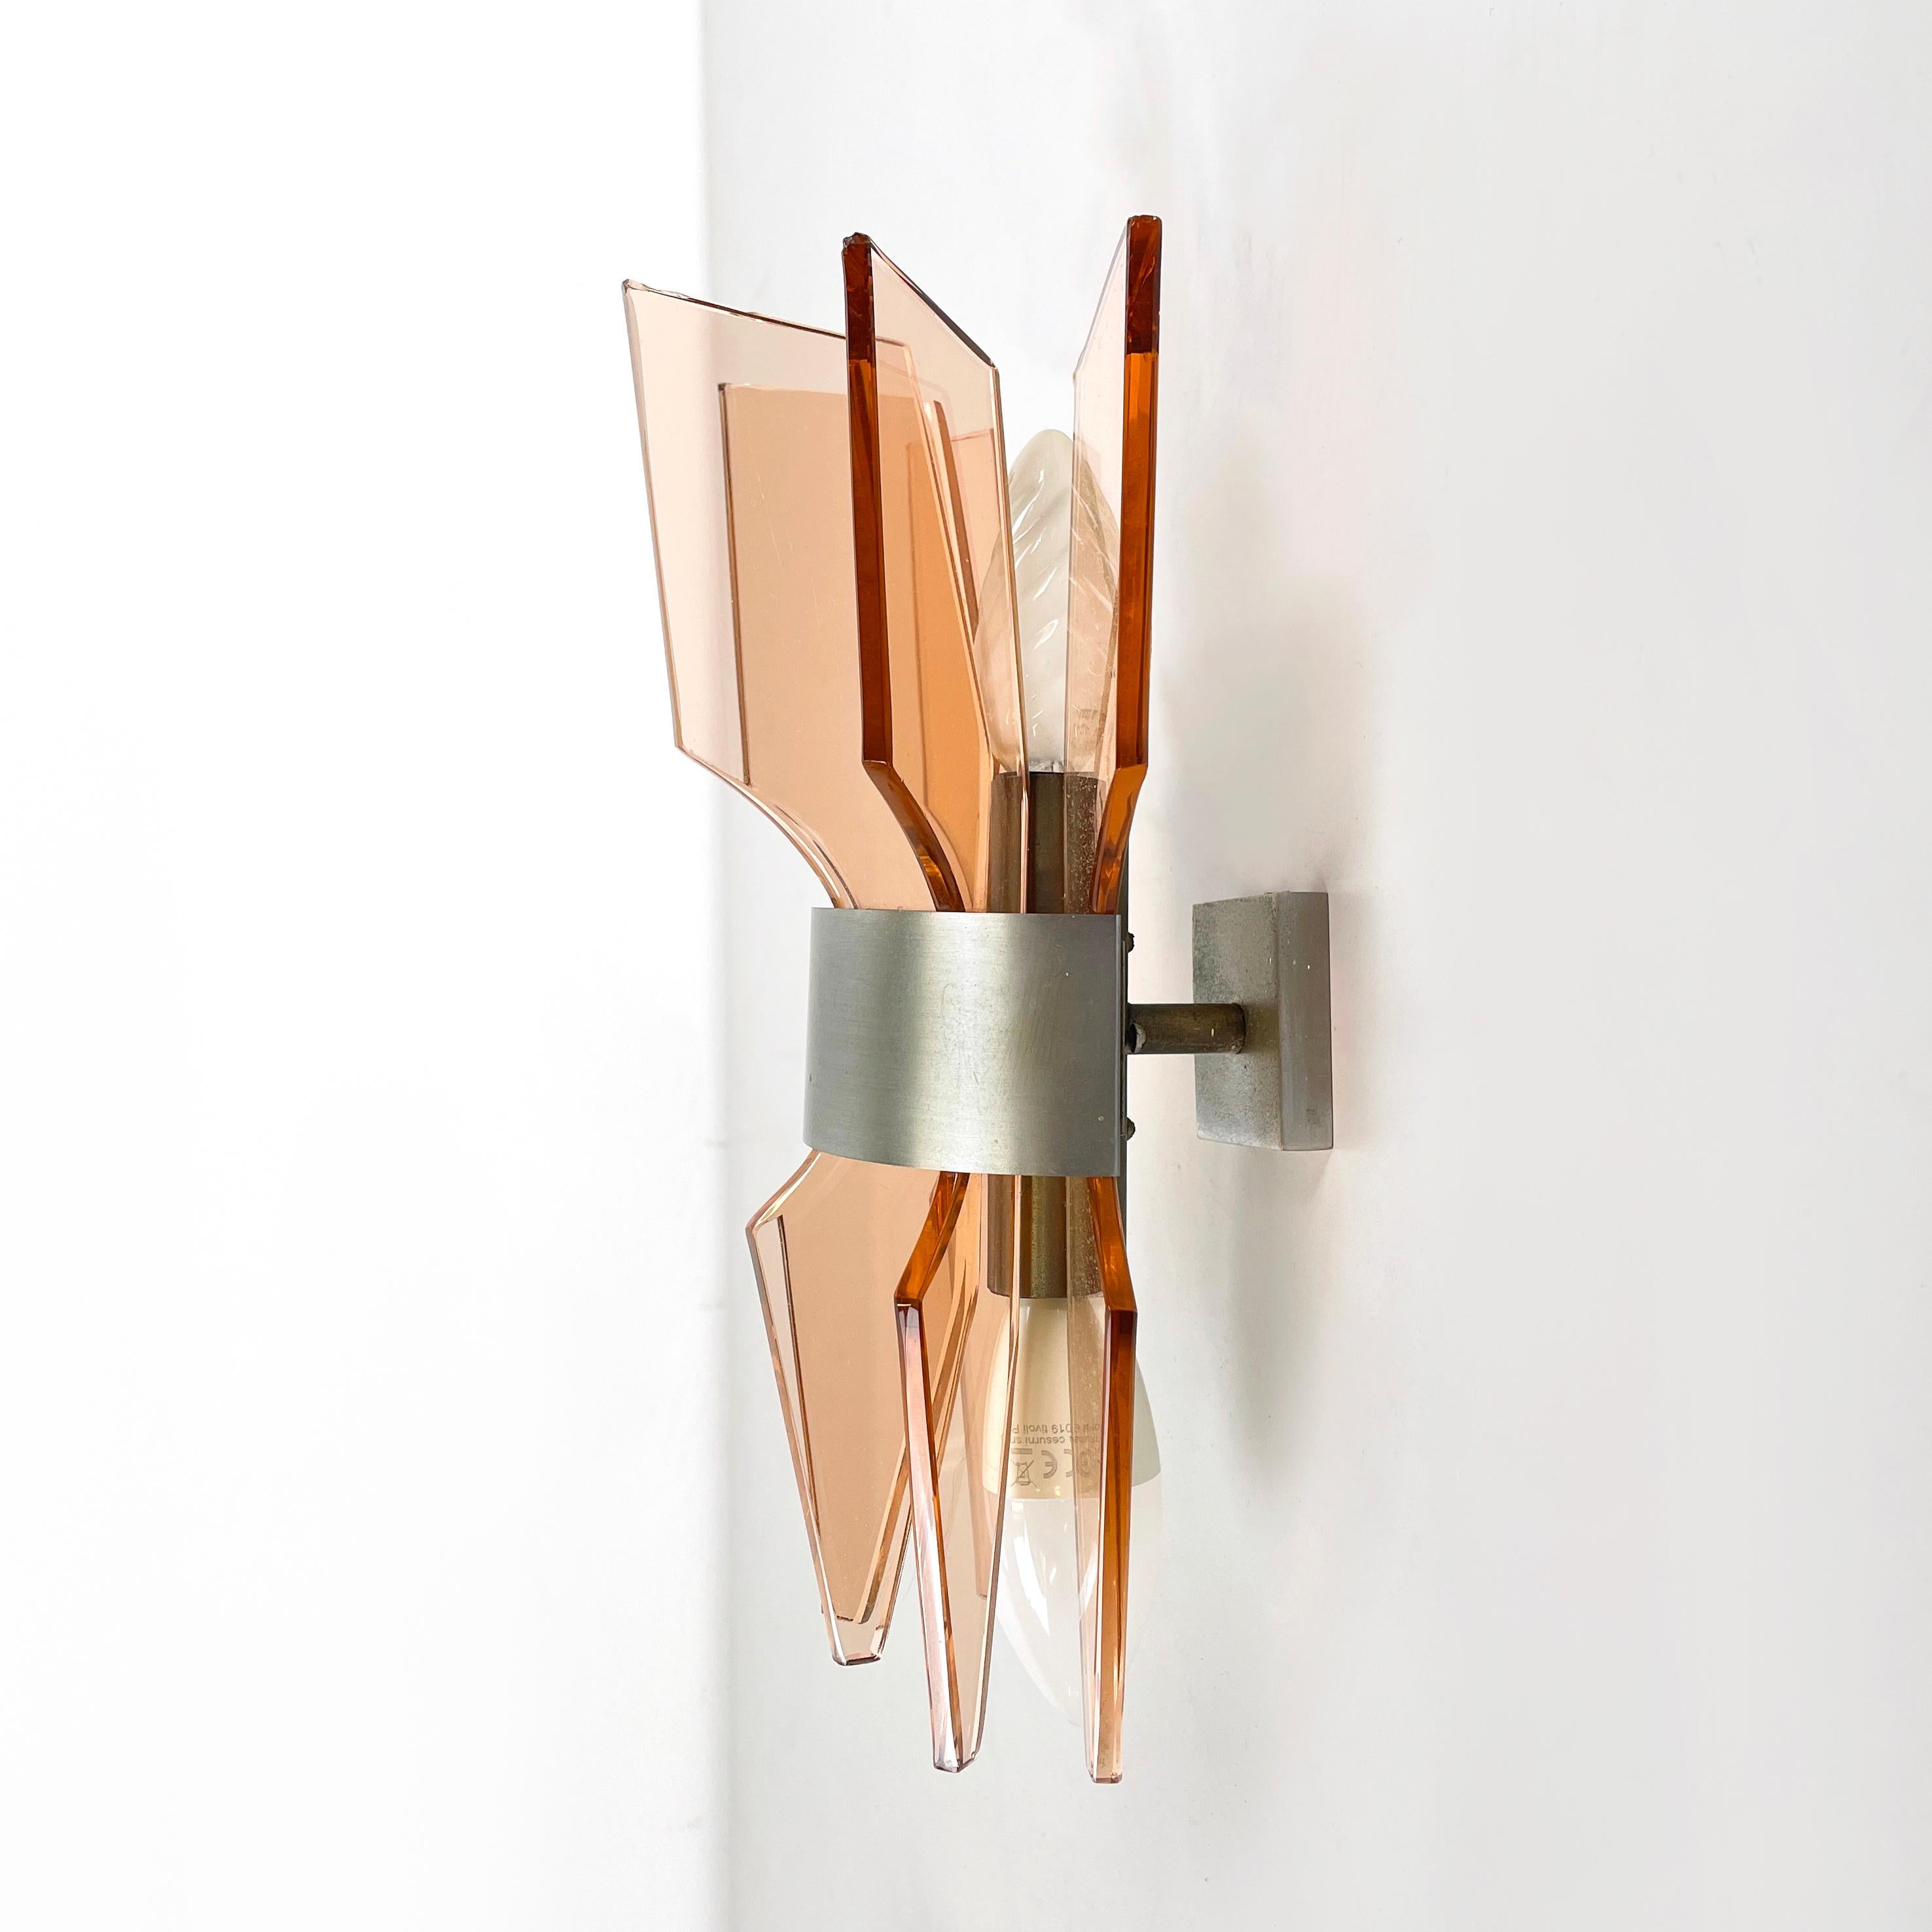 Metal Italian mid-century modern Wall lamps in peach pink glass and metal, 1960s